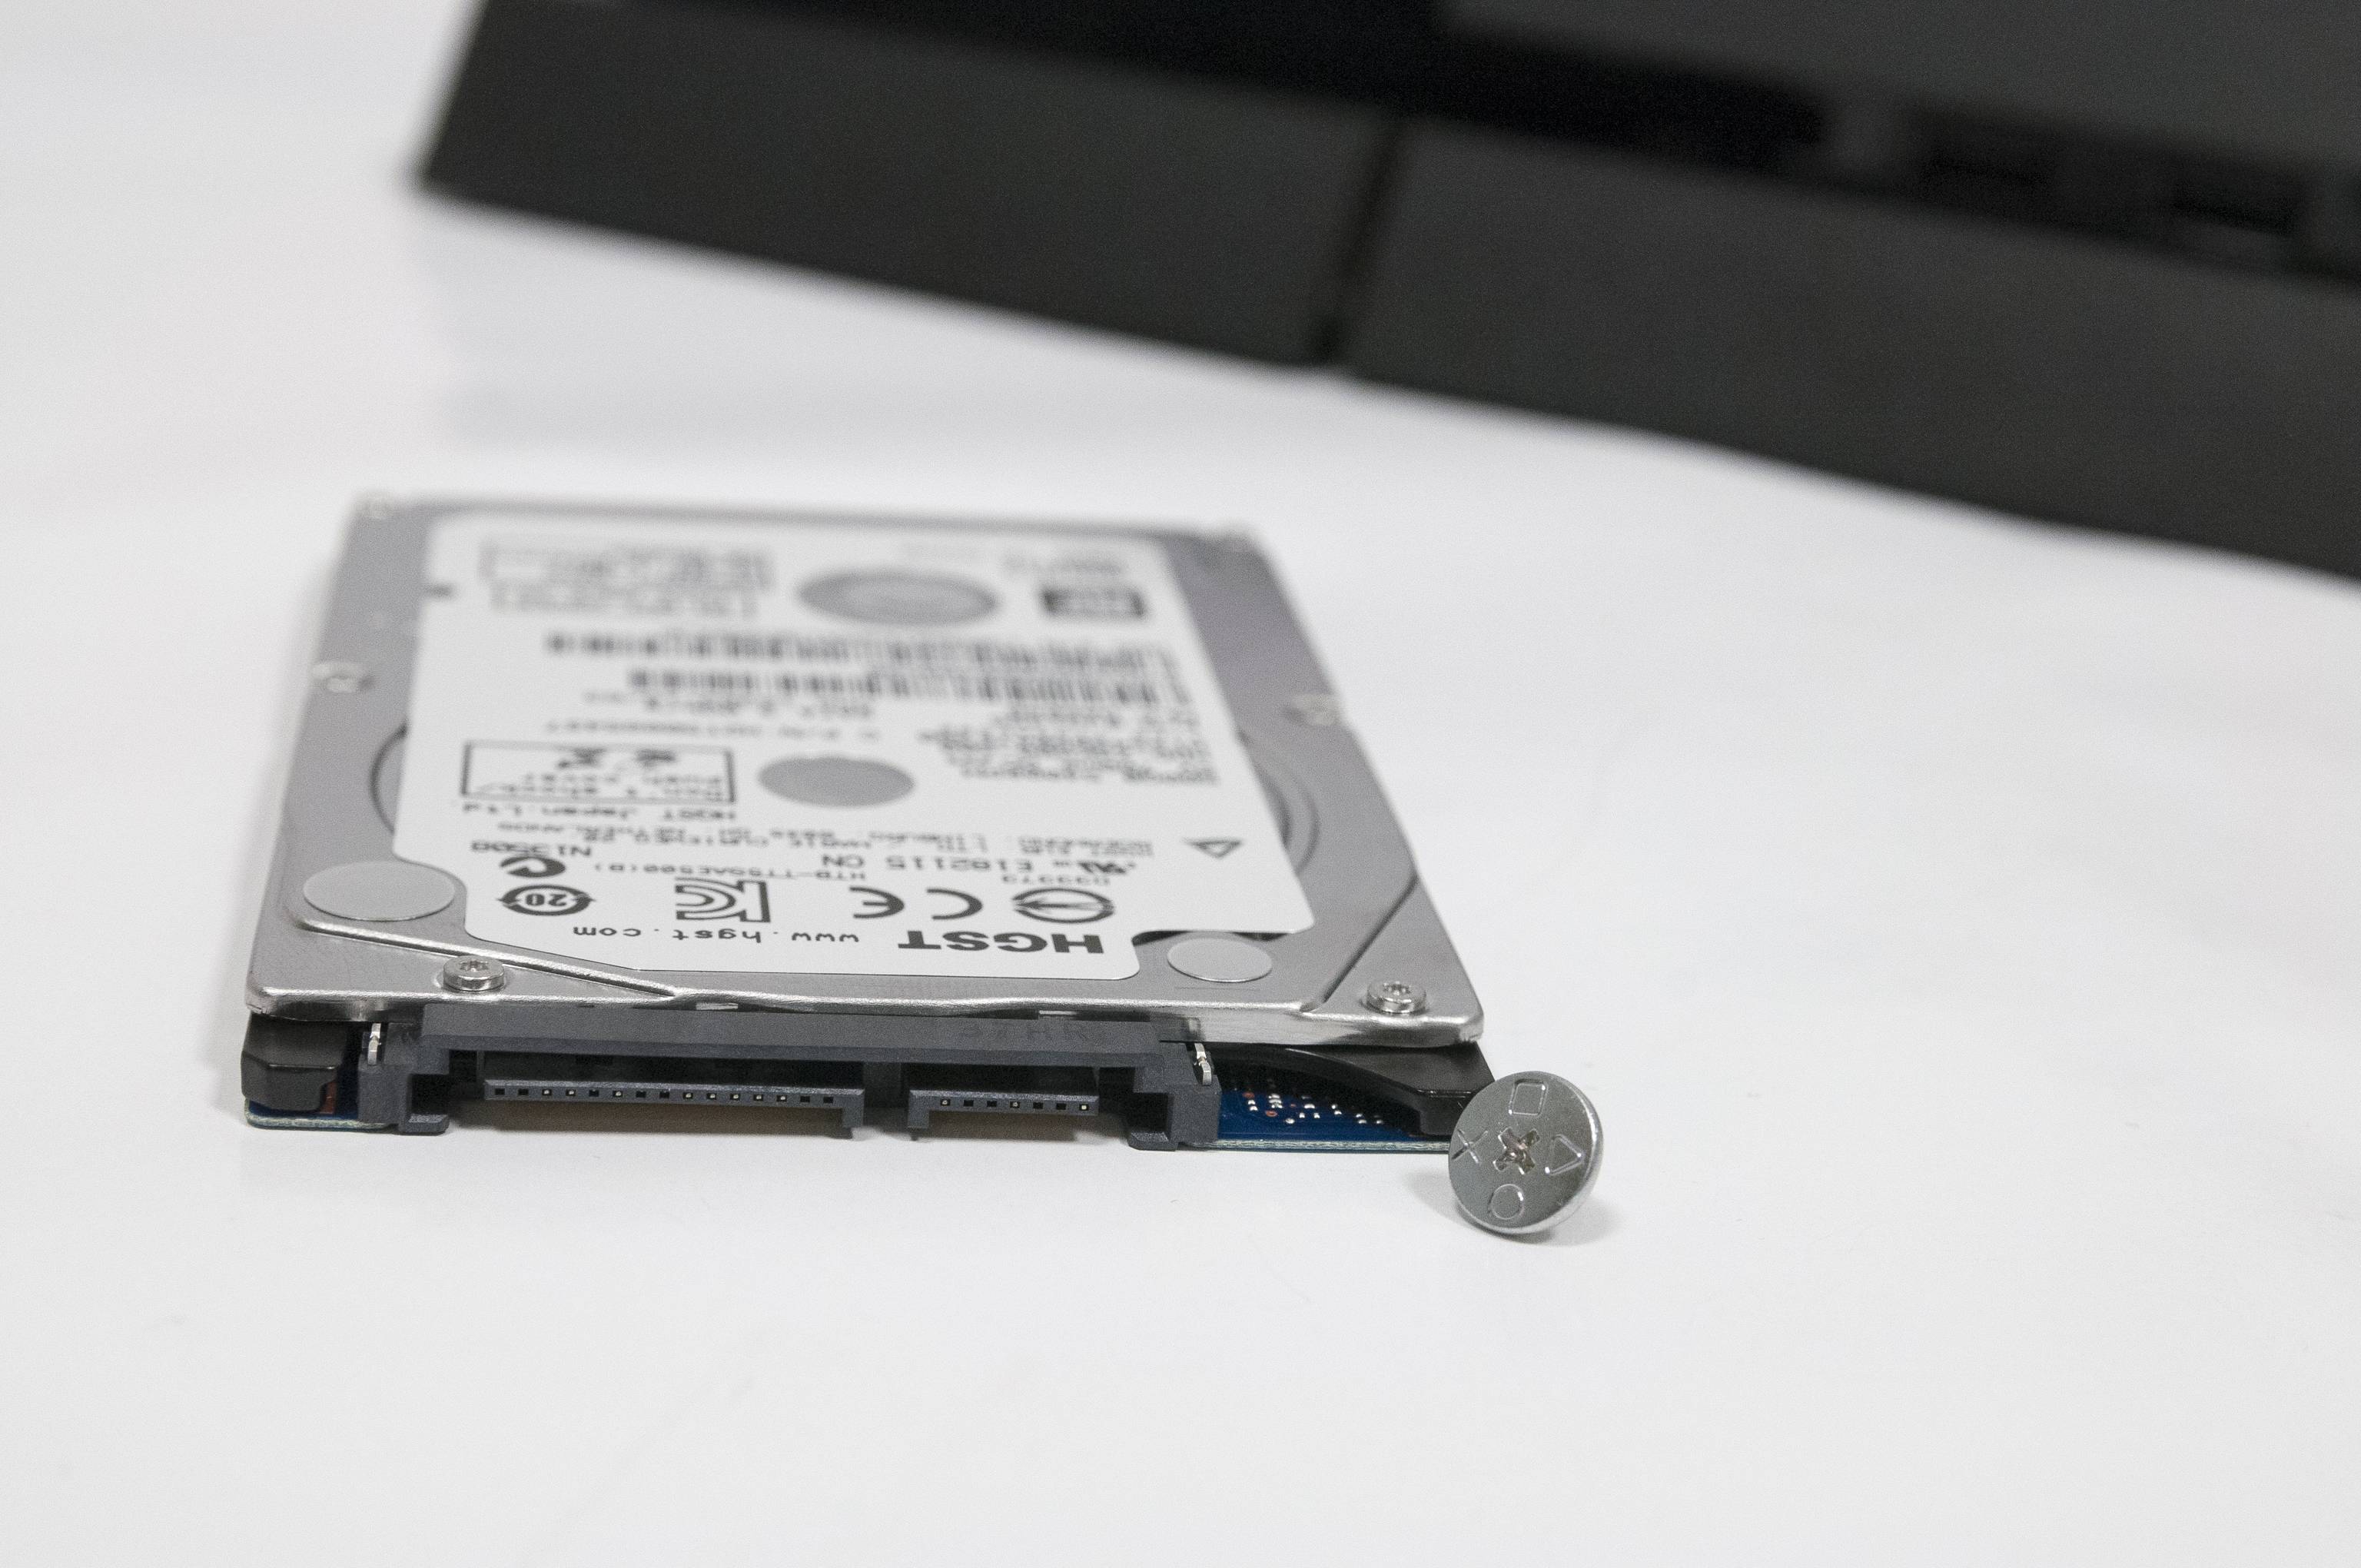 How to upgrade the PS4 hard-drive (picture guide) - Cheats.co